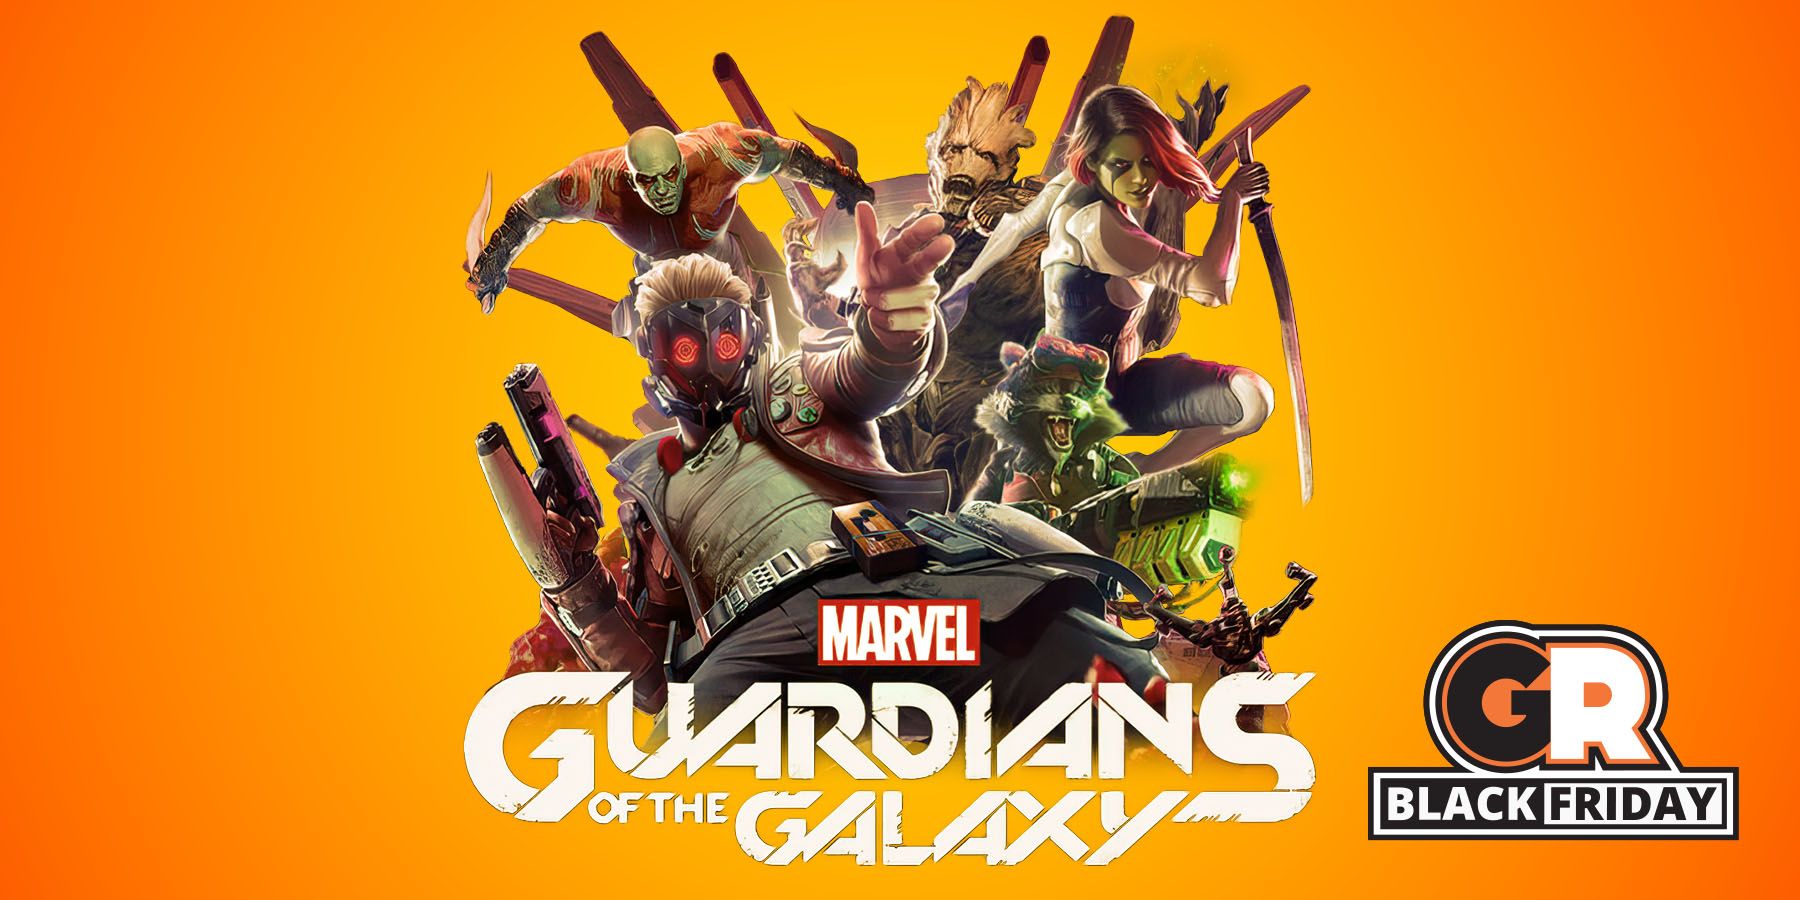 marvels guardians of the galaxy ps5 ps4 xbox gamerant amazon black friday deals feature